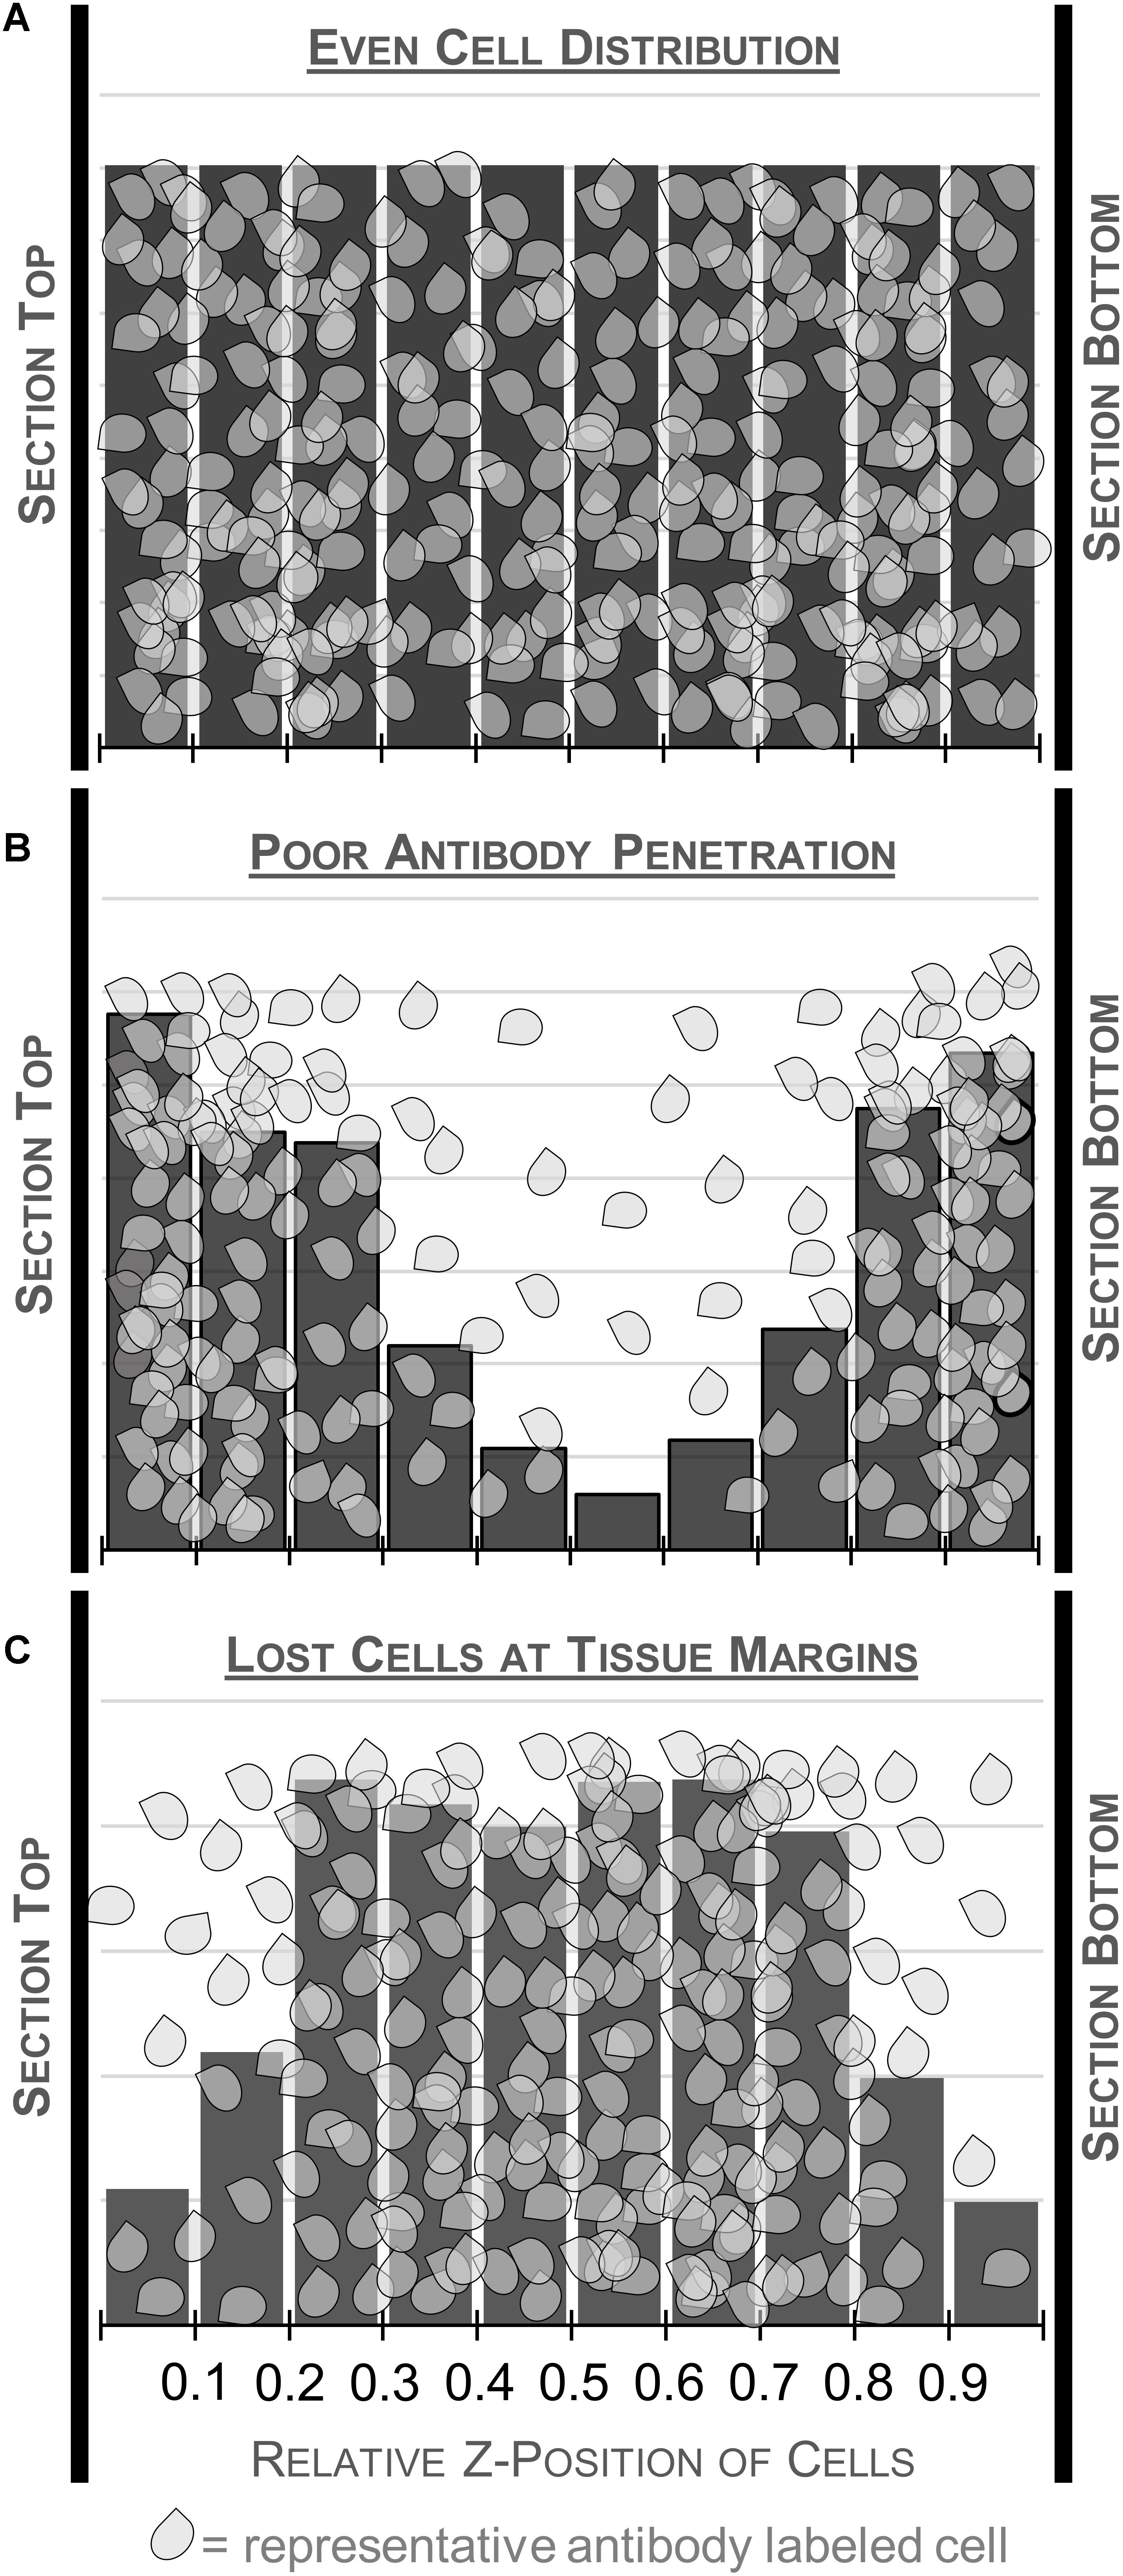 idiosyncratic cell distribution stereology